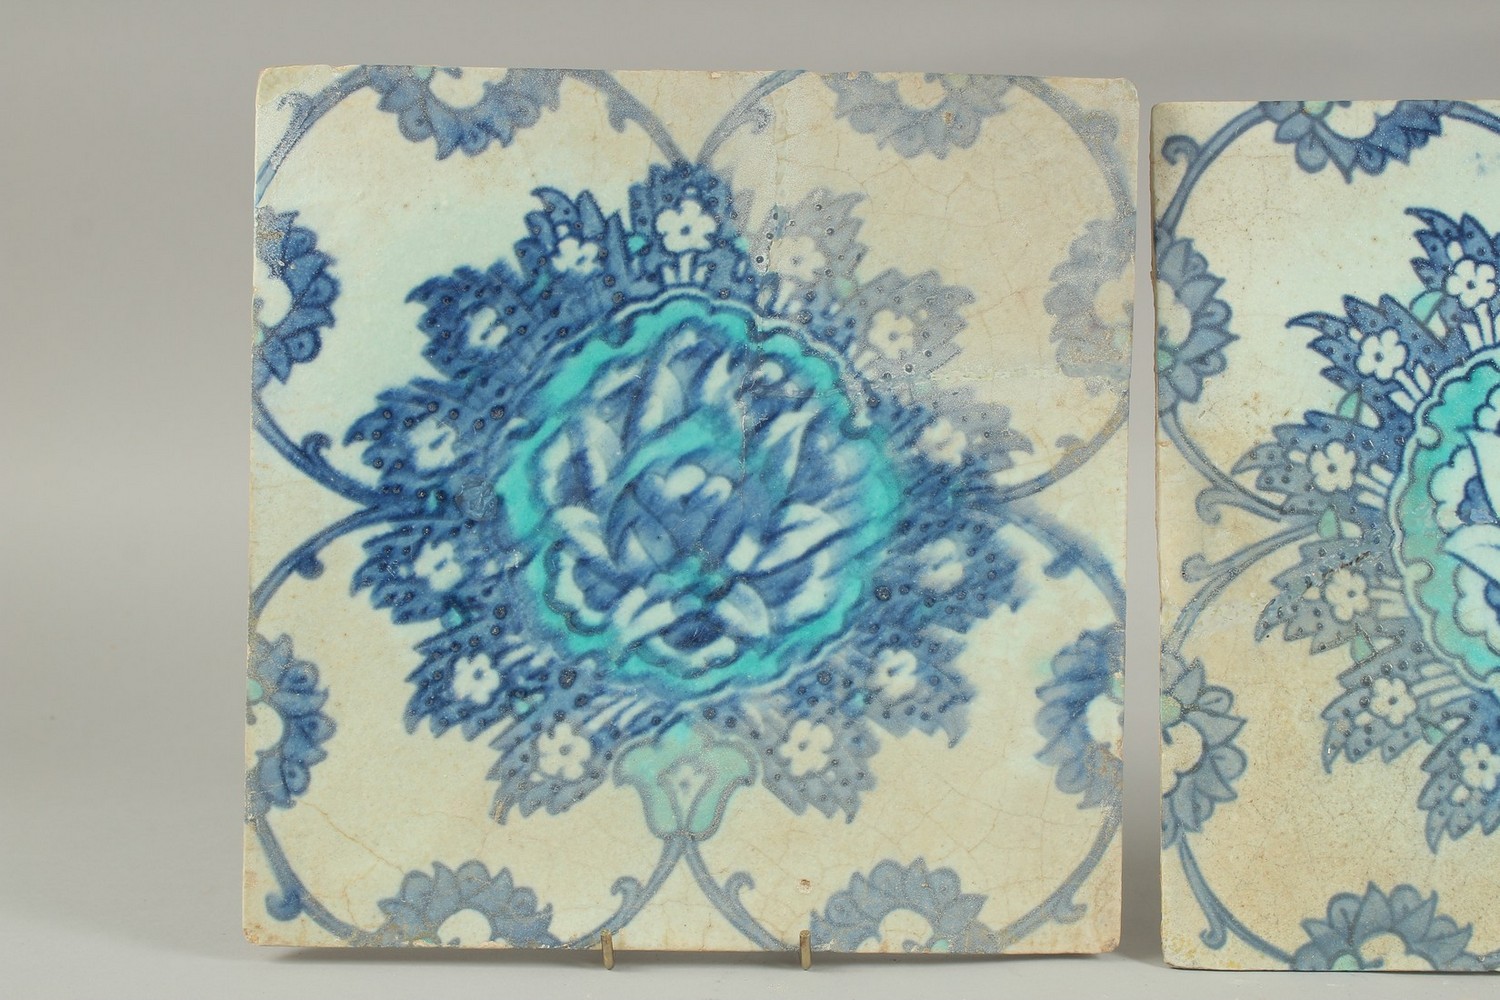 TWO EARLY 17TH CENTURY OTTOMAN IZNIK TILES, depicting a large lotus flower, (2). - Image 2 of 6